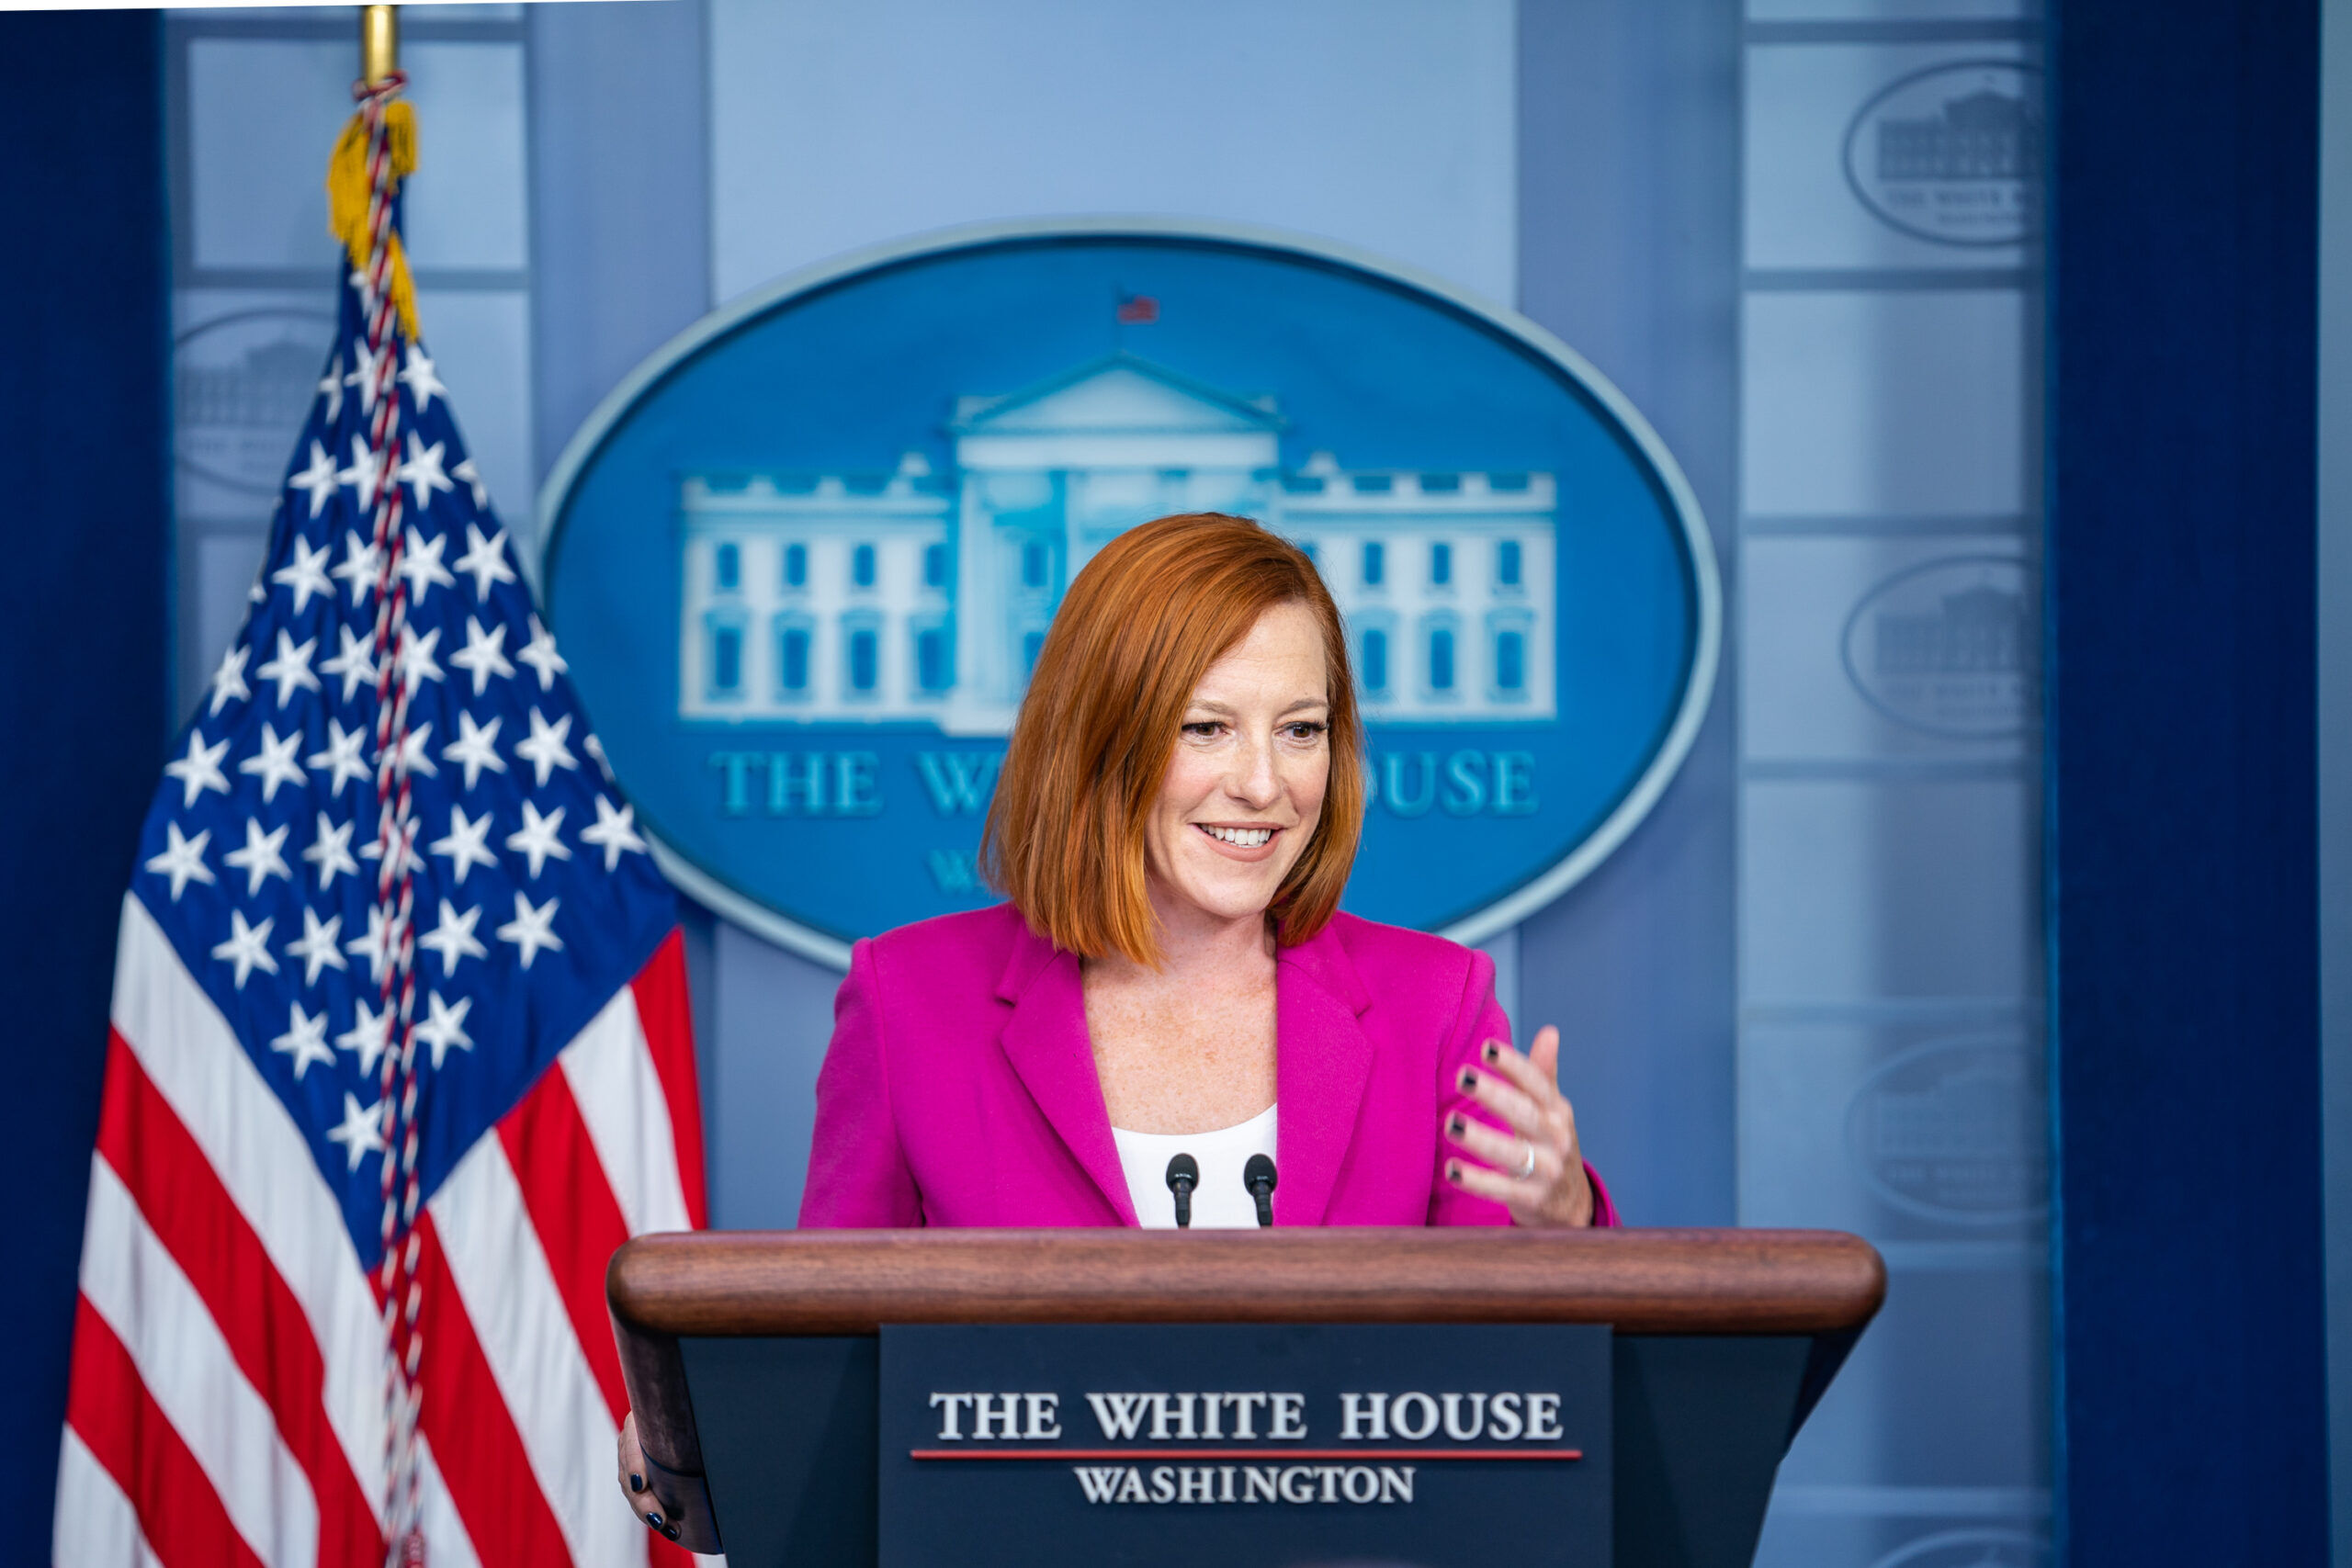 Press Secretary Jen Psaki deliver remarks and answers questions from members of the press Friday, October 22, 2021, in the James S. Brady Press Briefing Room. (Official White House Photo by Katie Ricks)